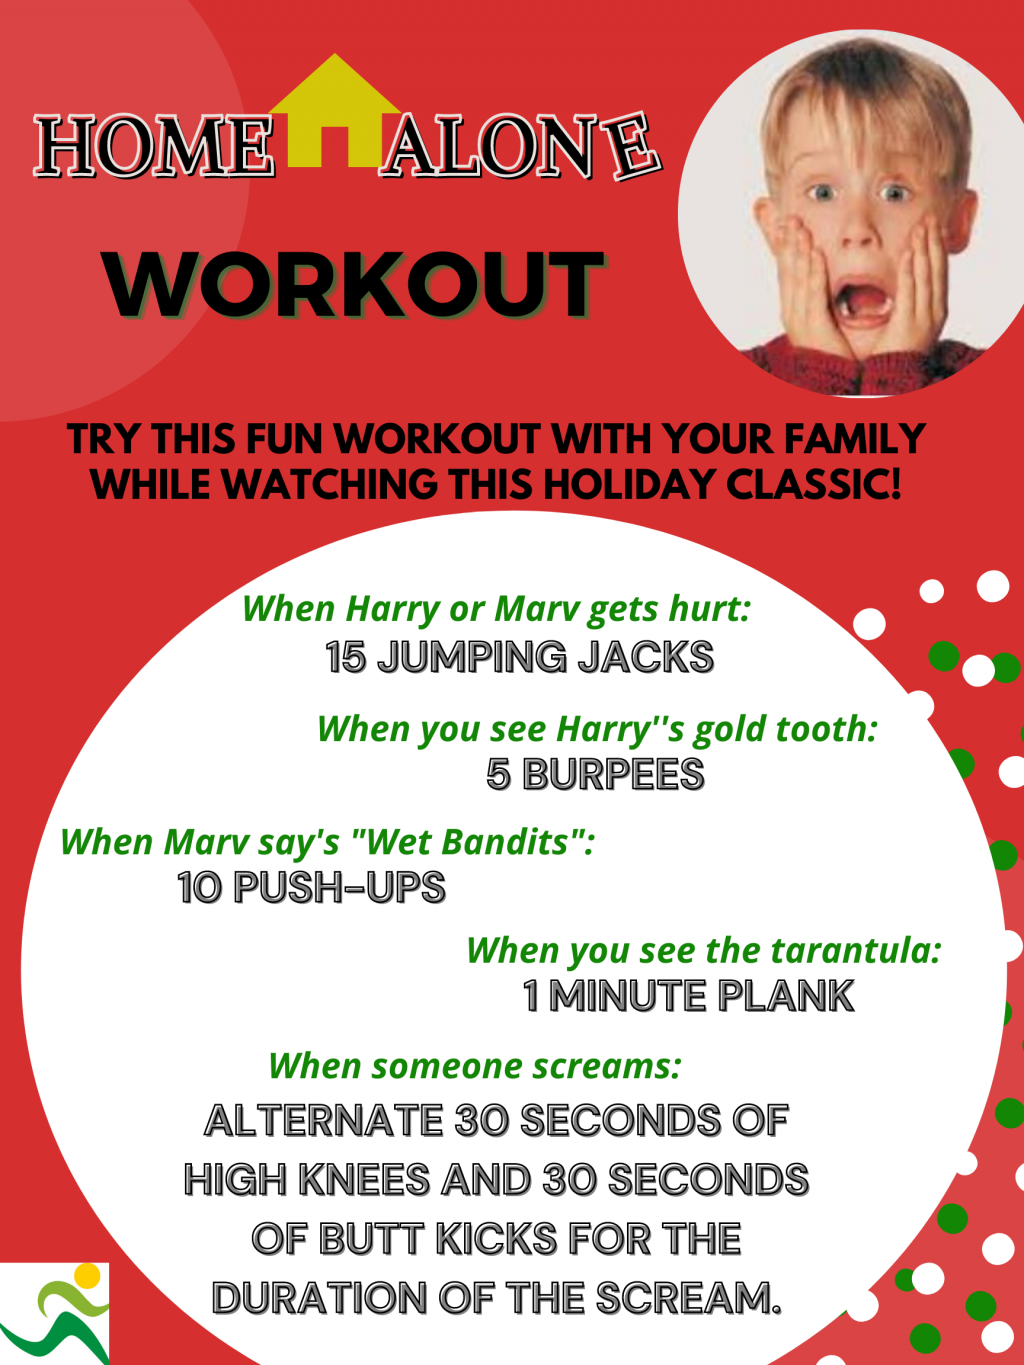 image-944494-home_alone_movie_workout-d3d94.jpg